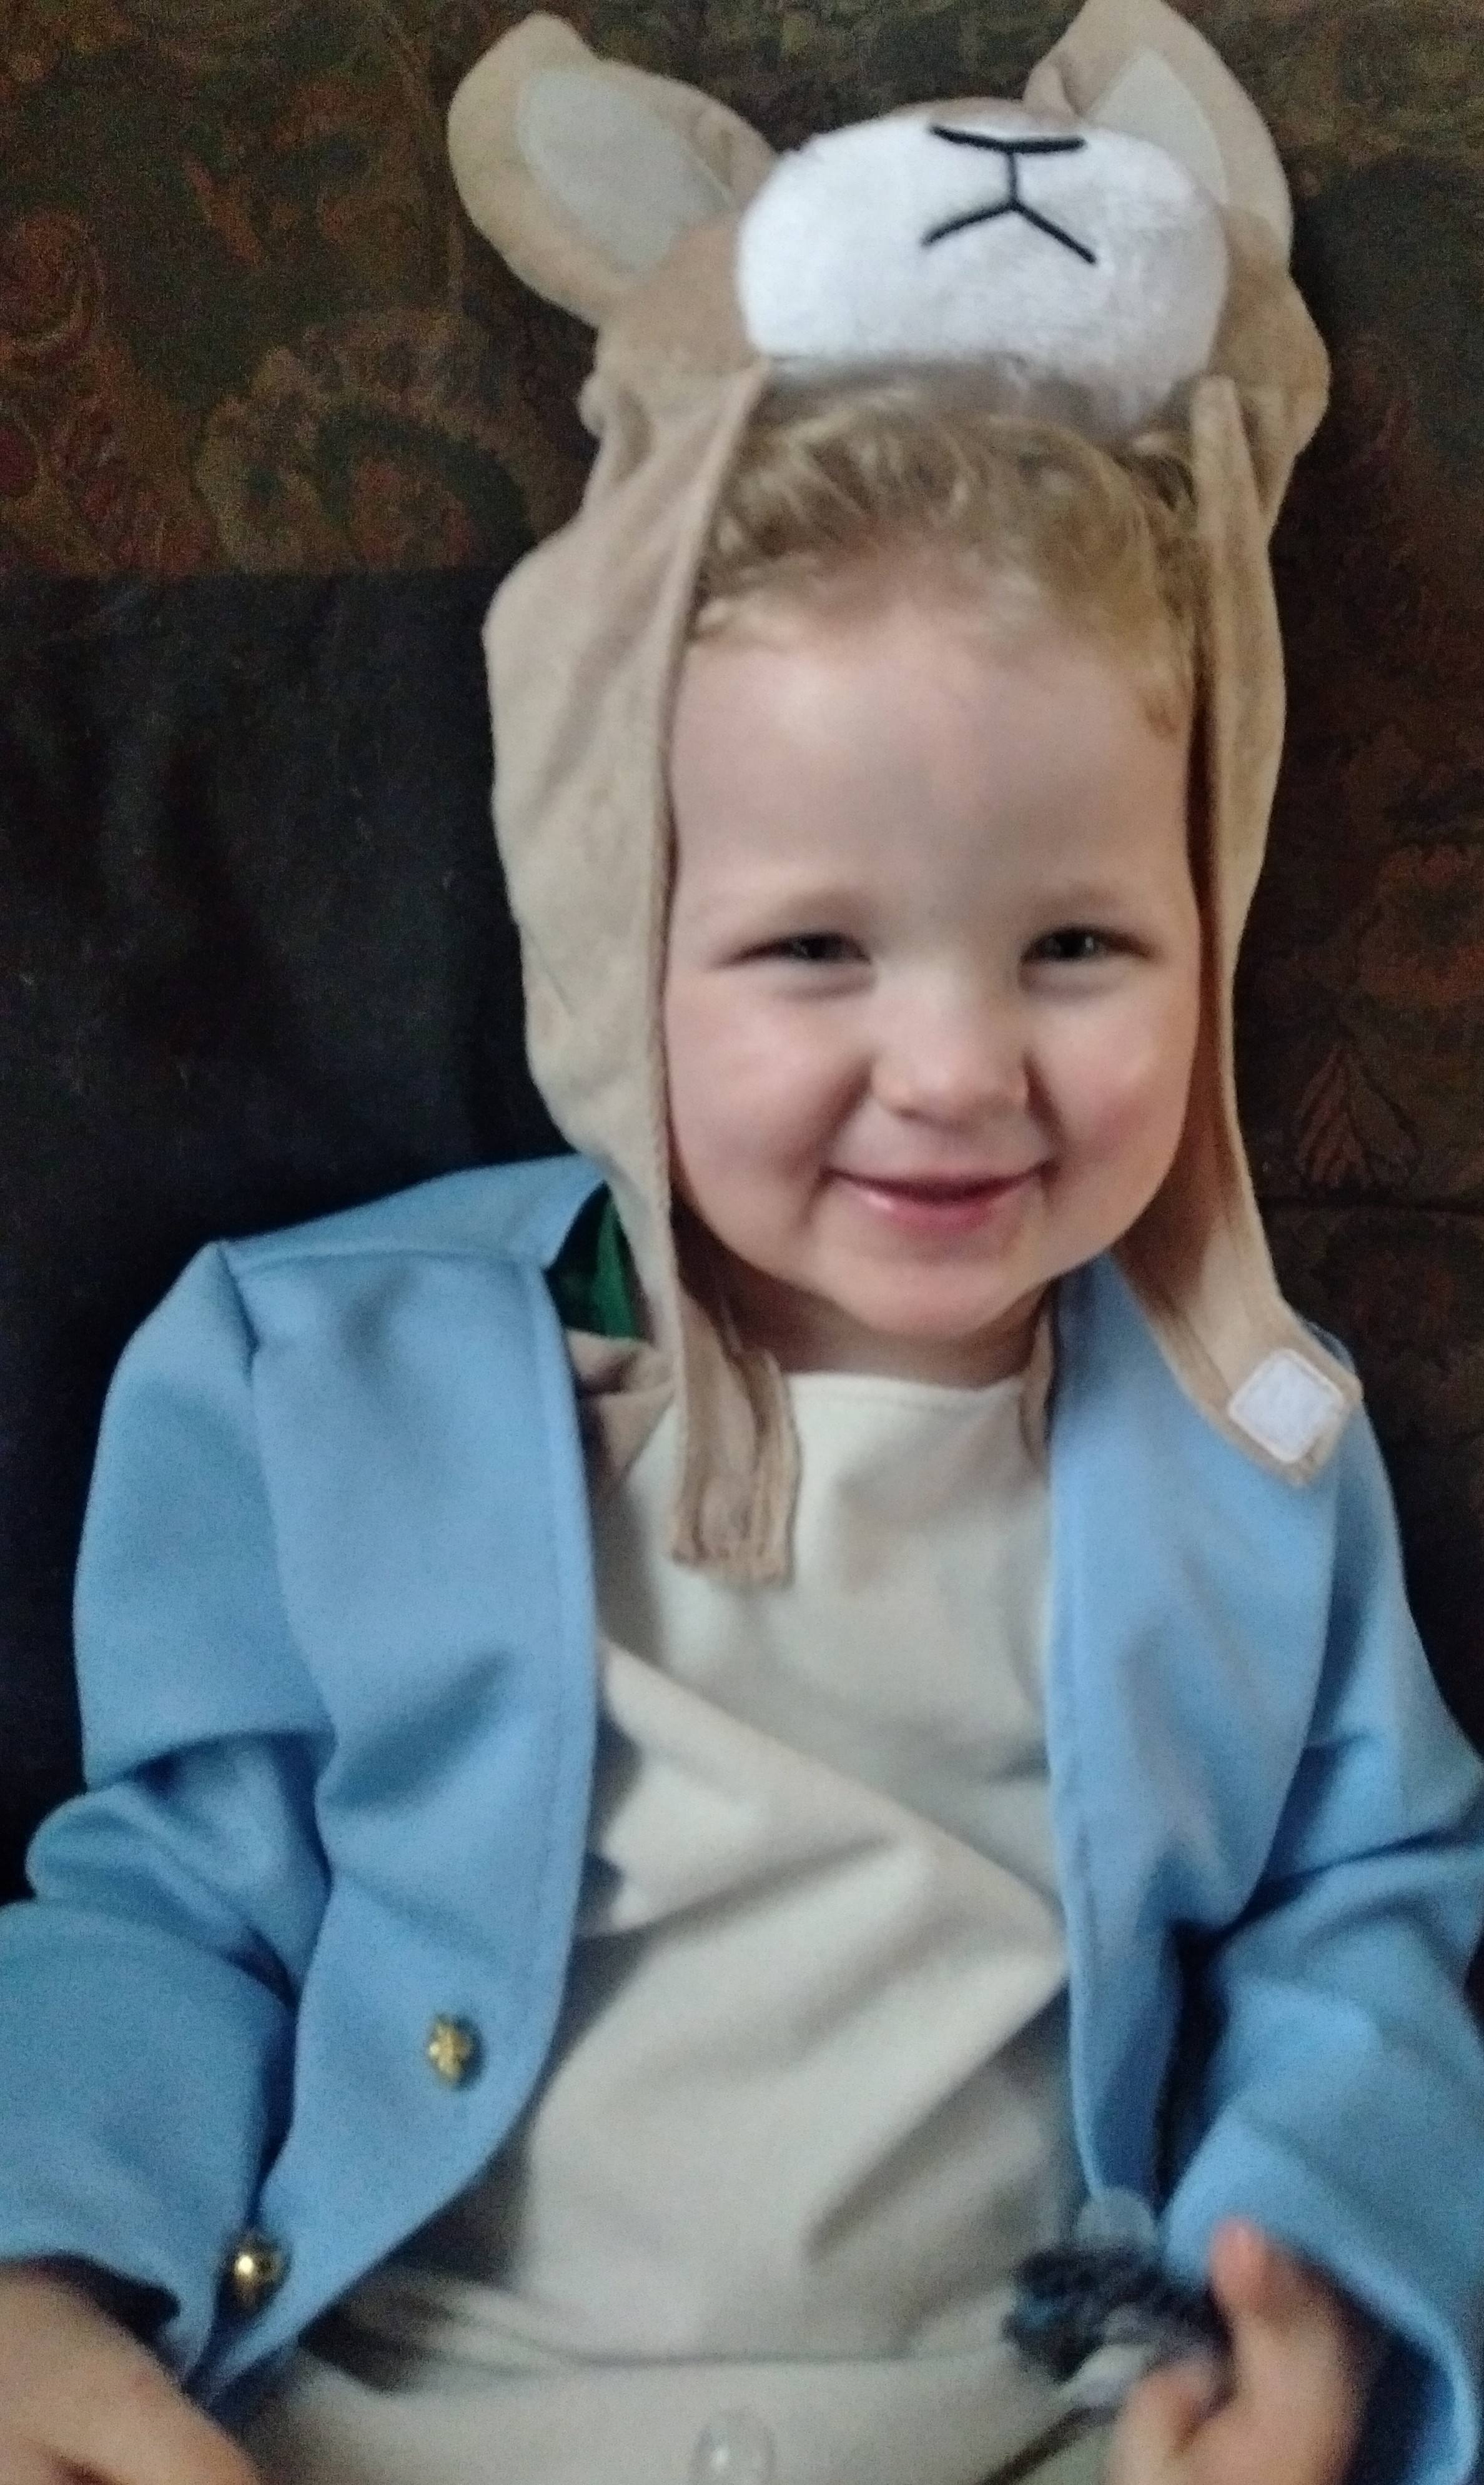 Rhys dressed up as Peter Rabbit.